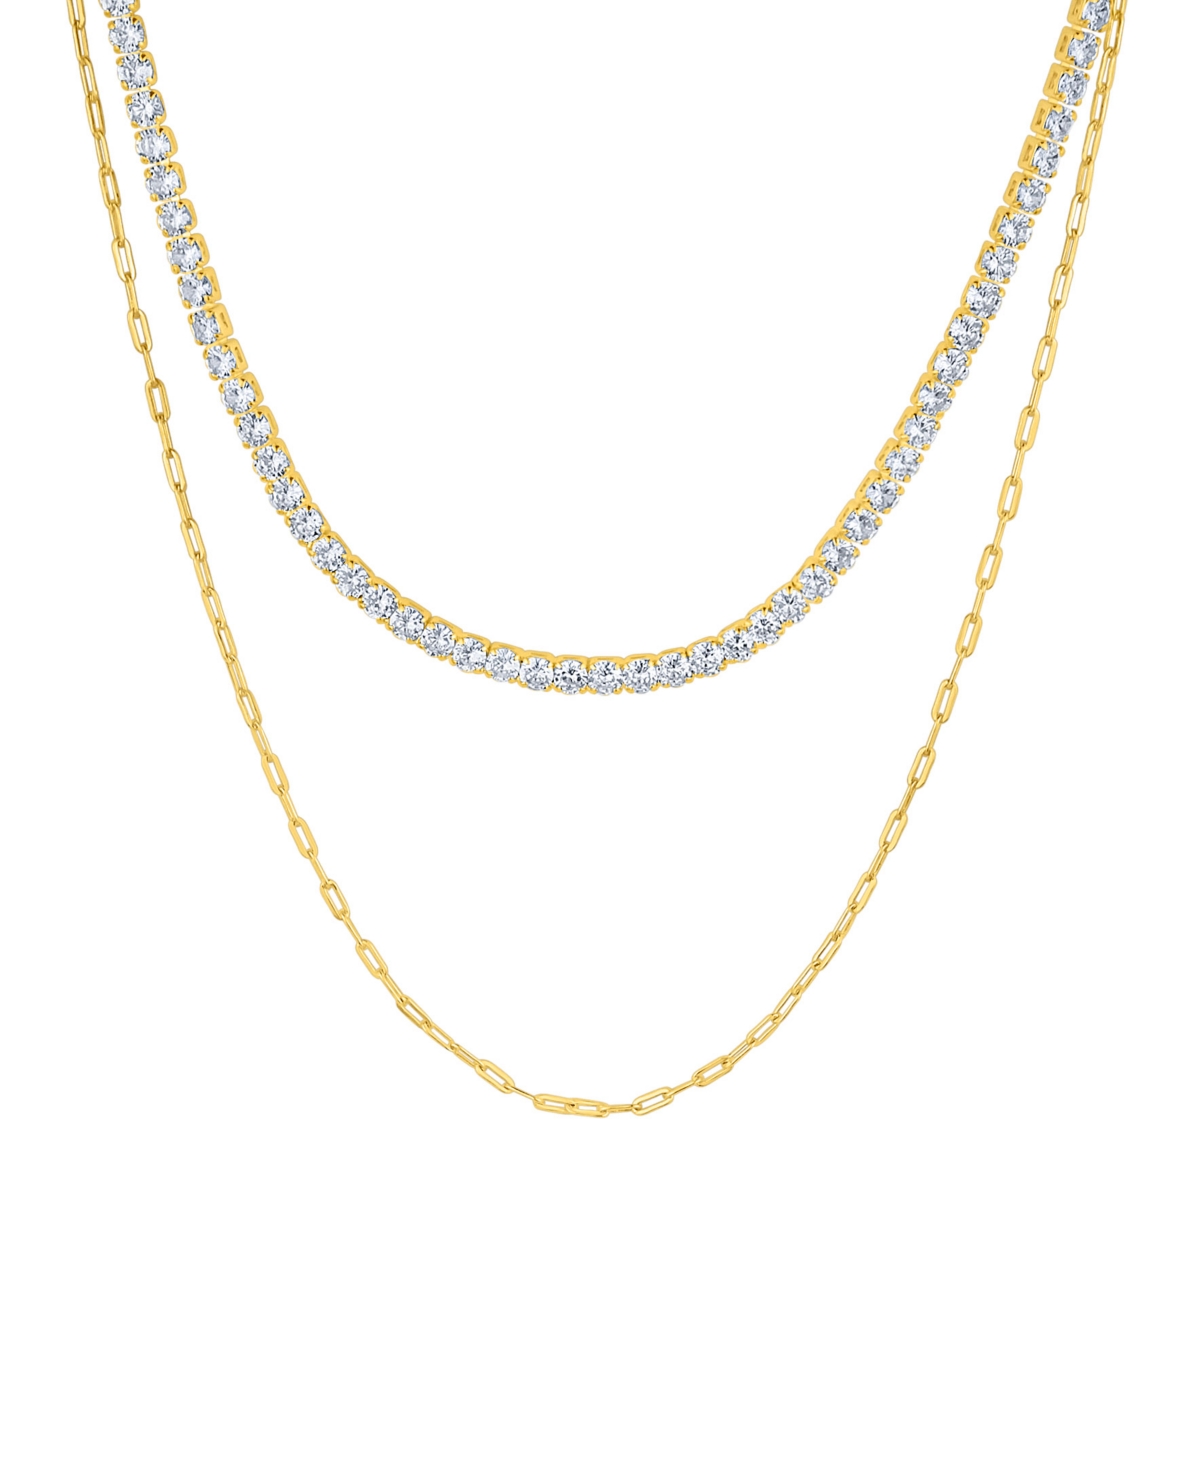 Double Row Chain with Cubic Zirconia Tennis Necklace and Clip Chain Necklace - Gold Plated